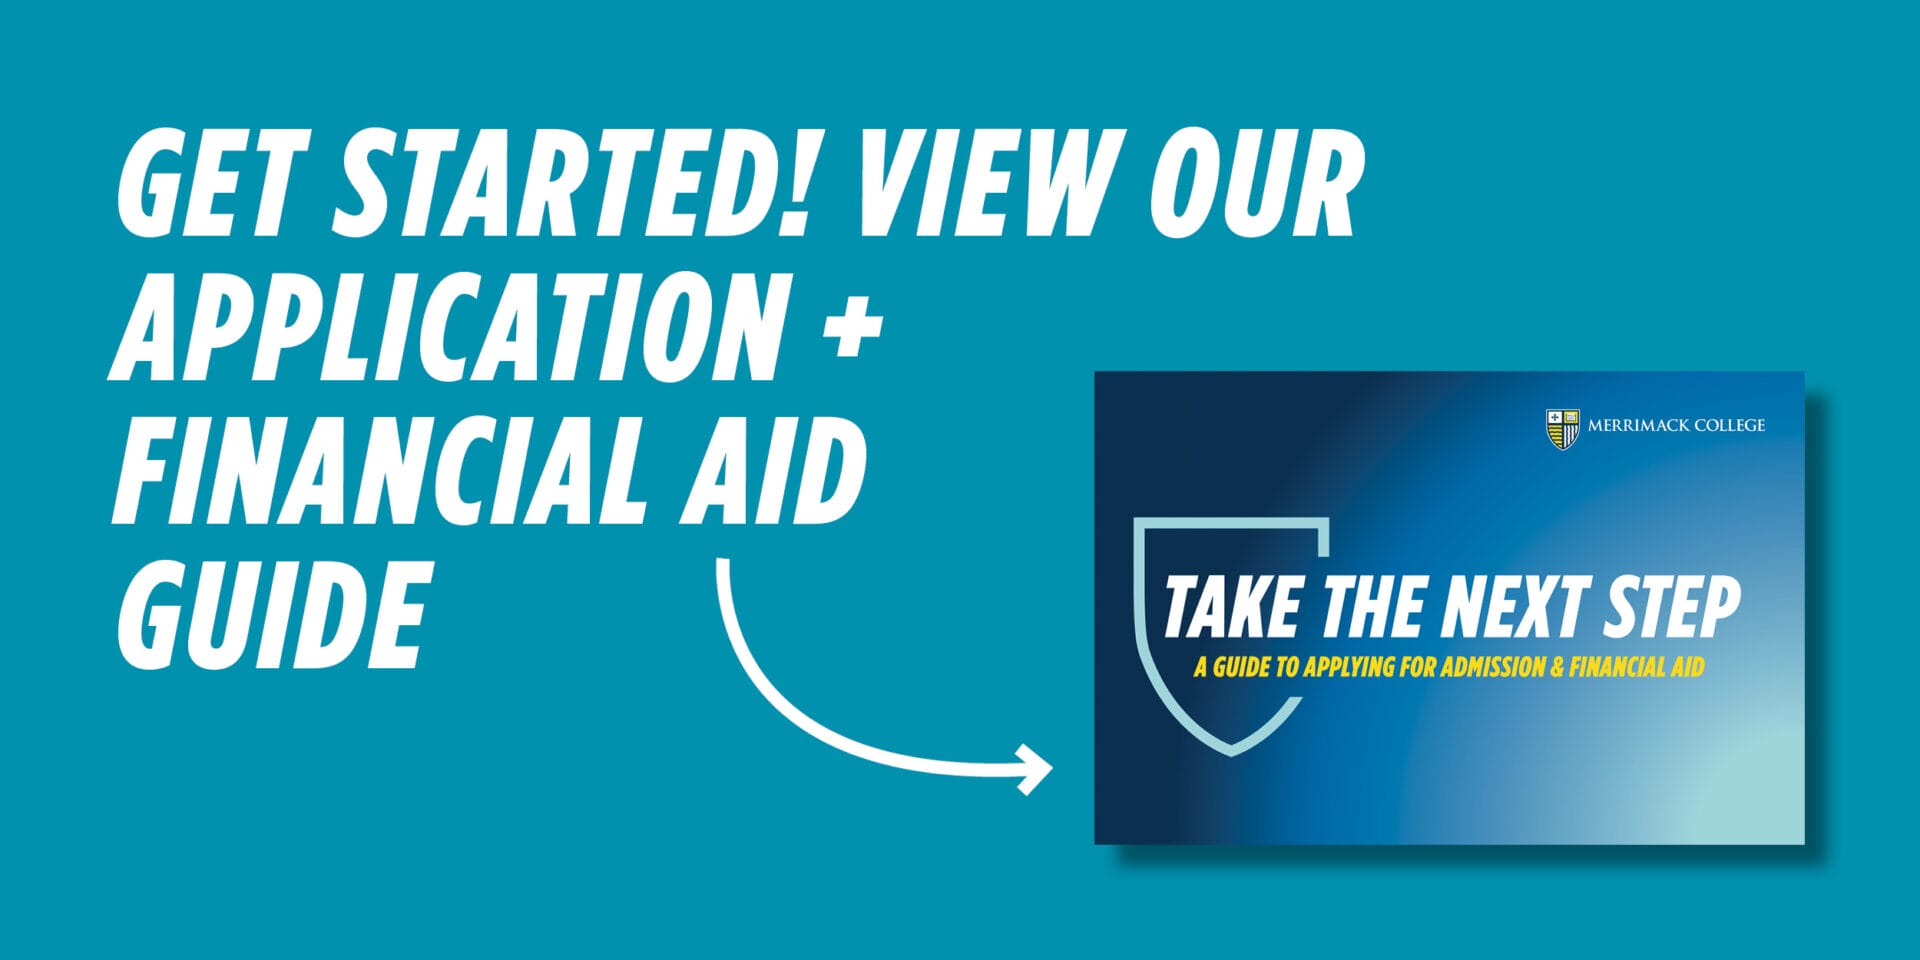 View the Application and Financial Aid Guide